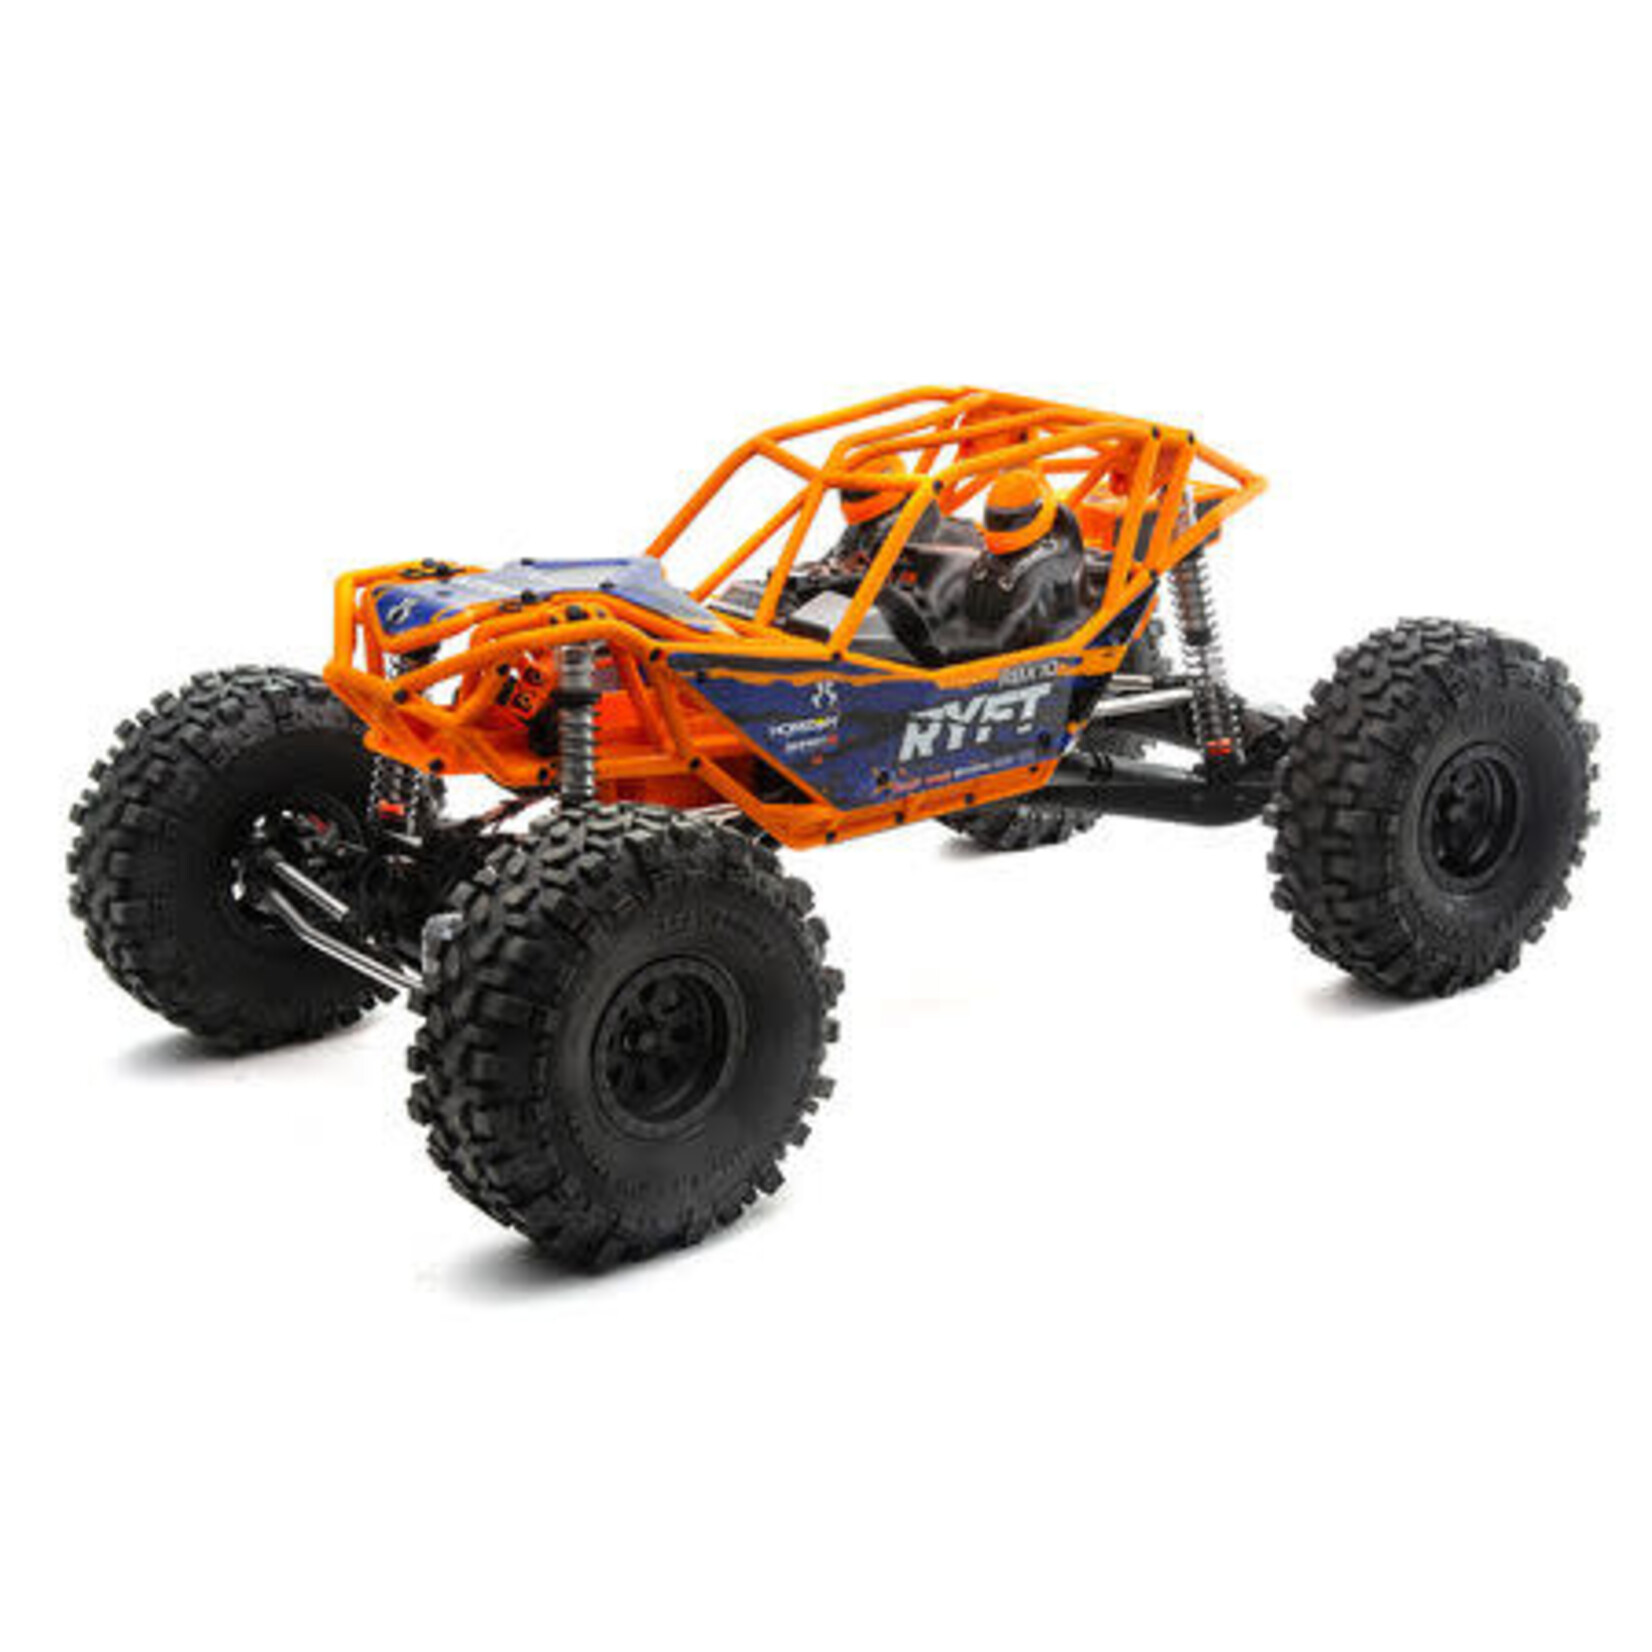 AXIAL AXI03005T1 1/10 RBX10 Ryft 4X4 Brushless Rock Bouncer RTR, Orange